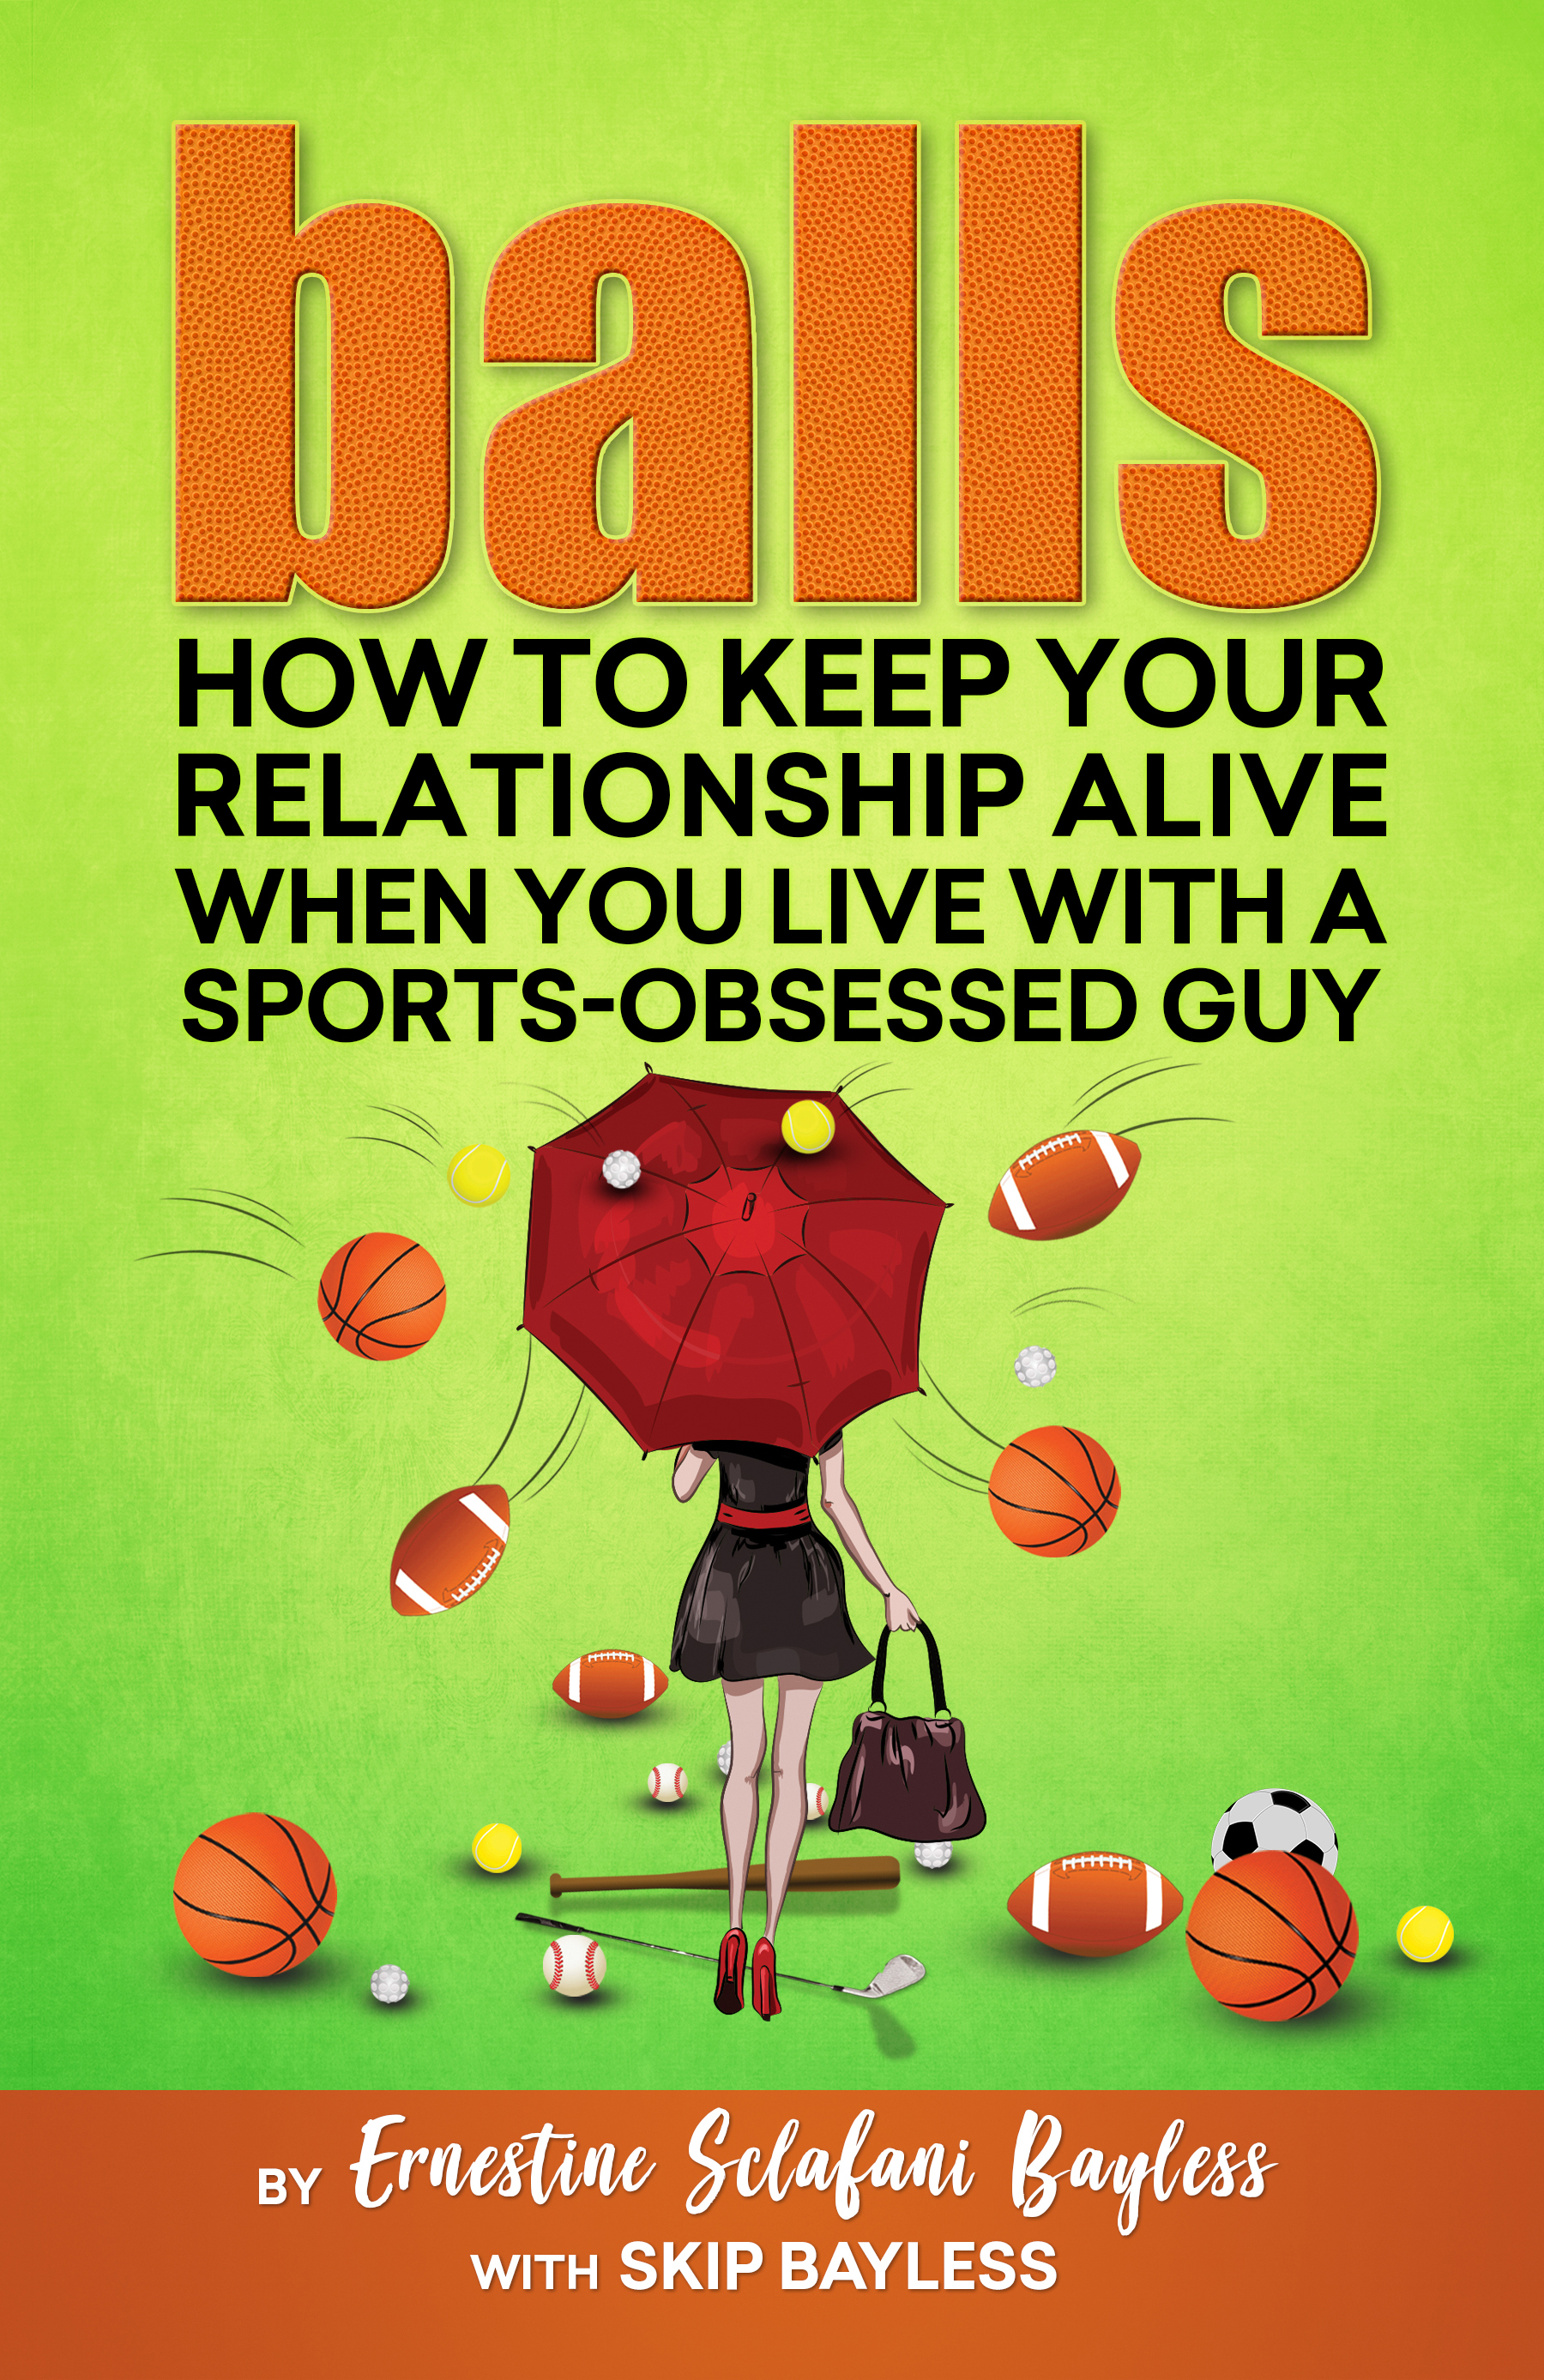 BALLS: How to Keep Your Relationship Alive When You Live with a Sports-Obsessed Guy By Ernestine Sclafani Bayless with Skip Bayless